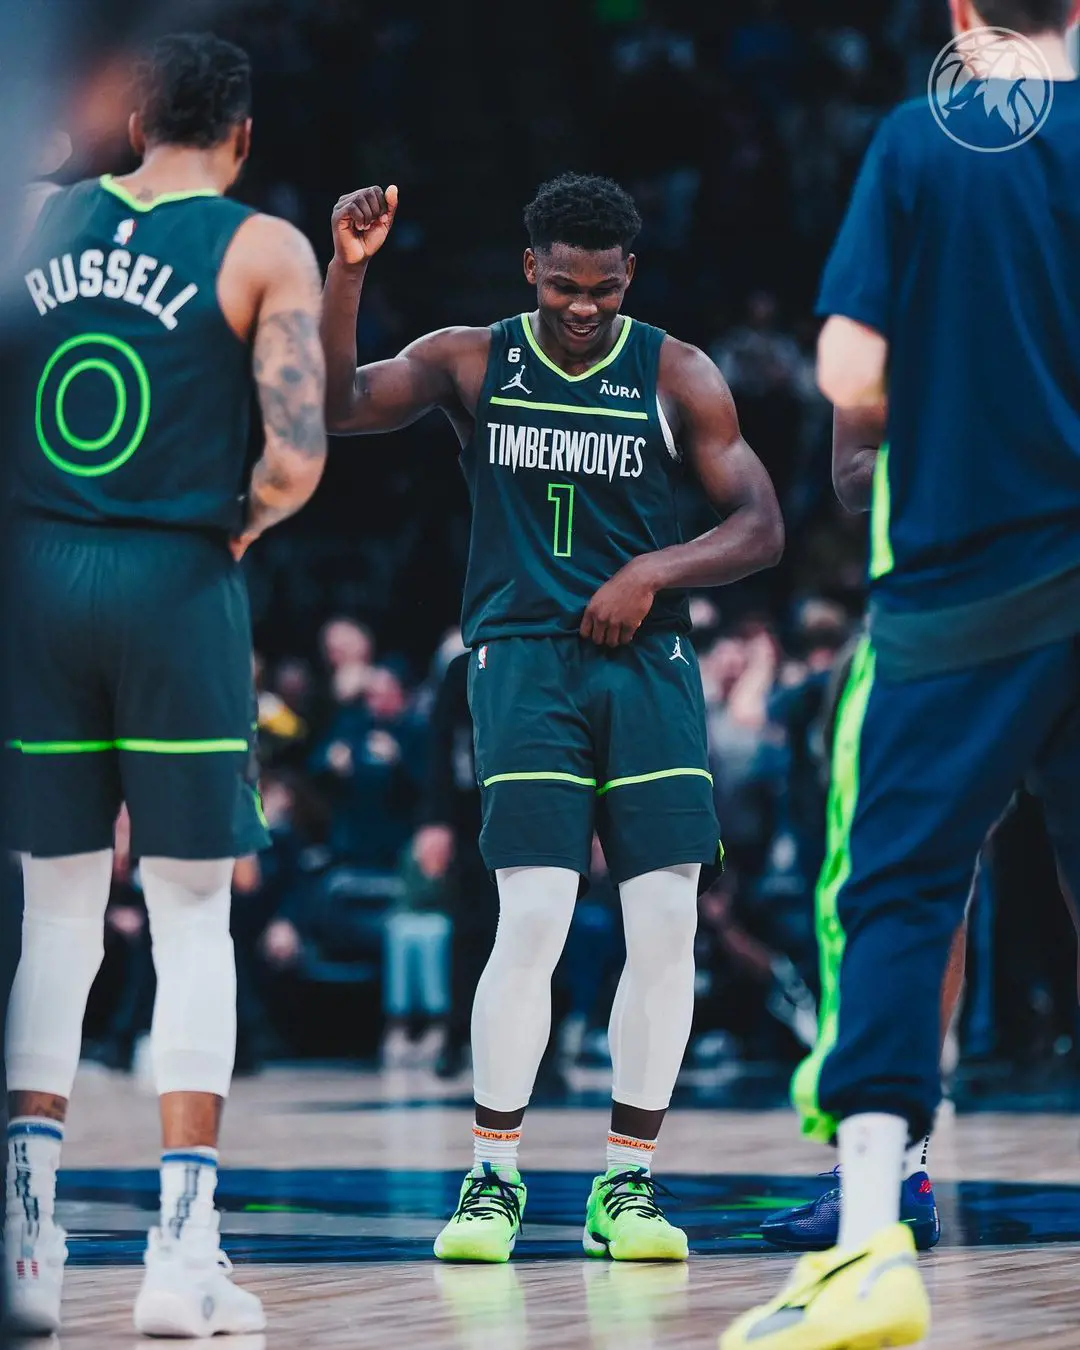 Minnesota Timberwolves wonderkid Anthony Edwards making some dance move after a win against Houston Rockets on January 22 [Credit: Timberwolves Instagram page]